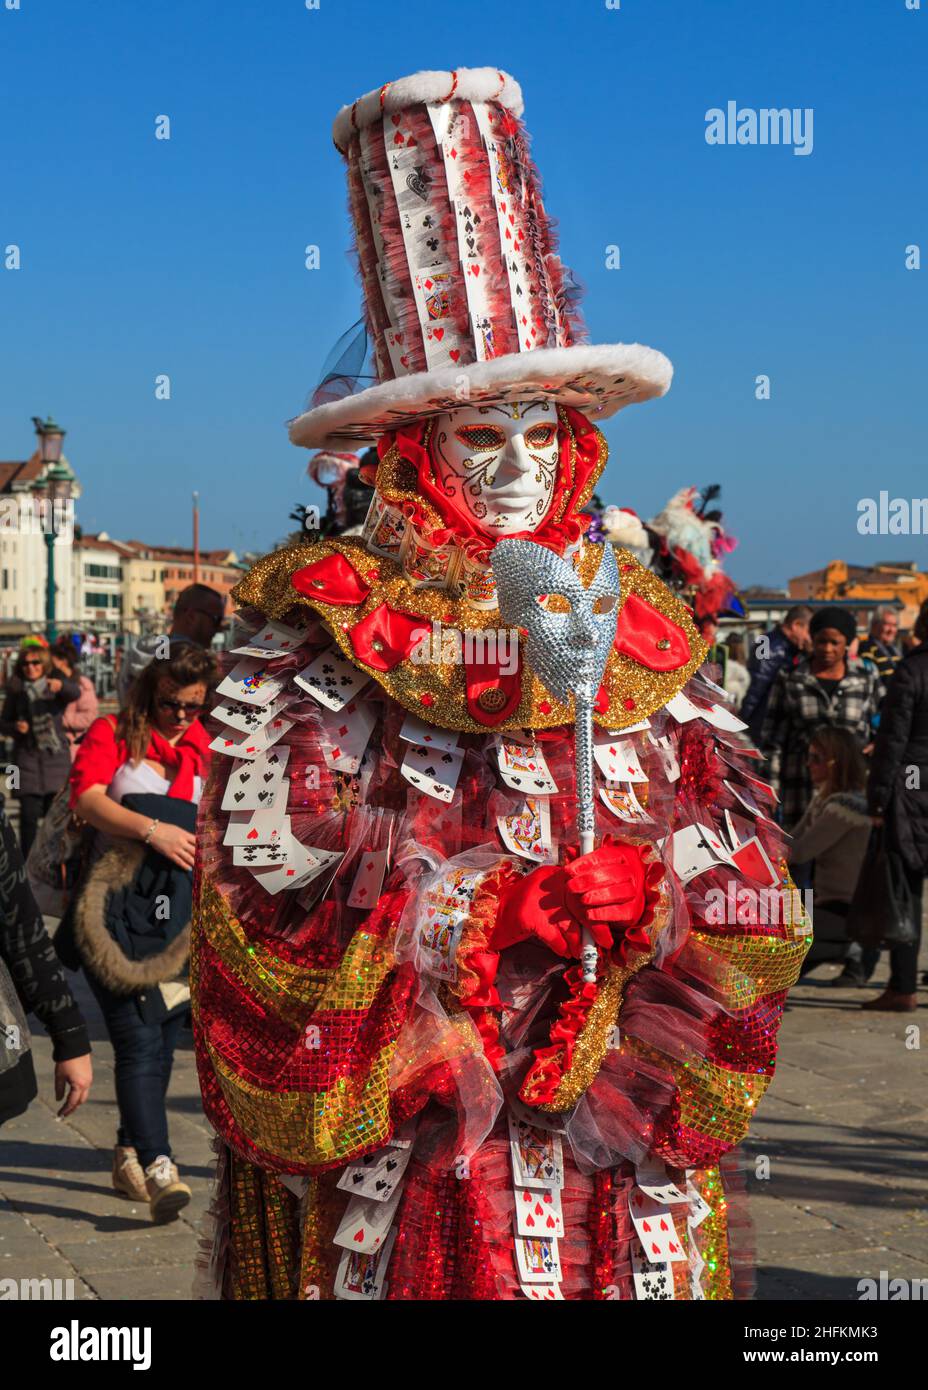 Participant in colourful card game fancy dress costume and mask at Carnevale di Venezia, Venice Carnival, Italy Stock Photo